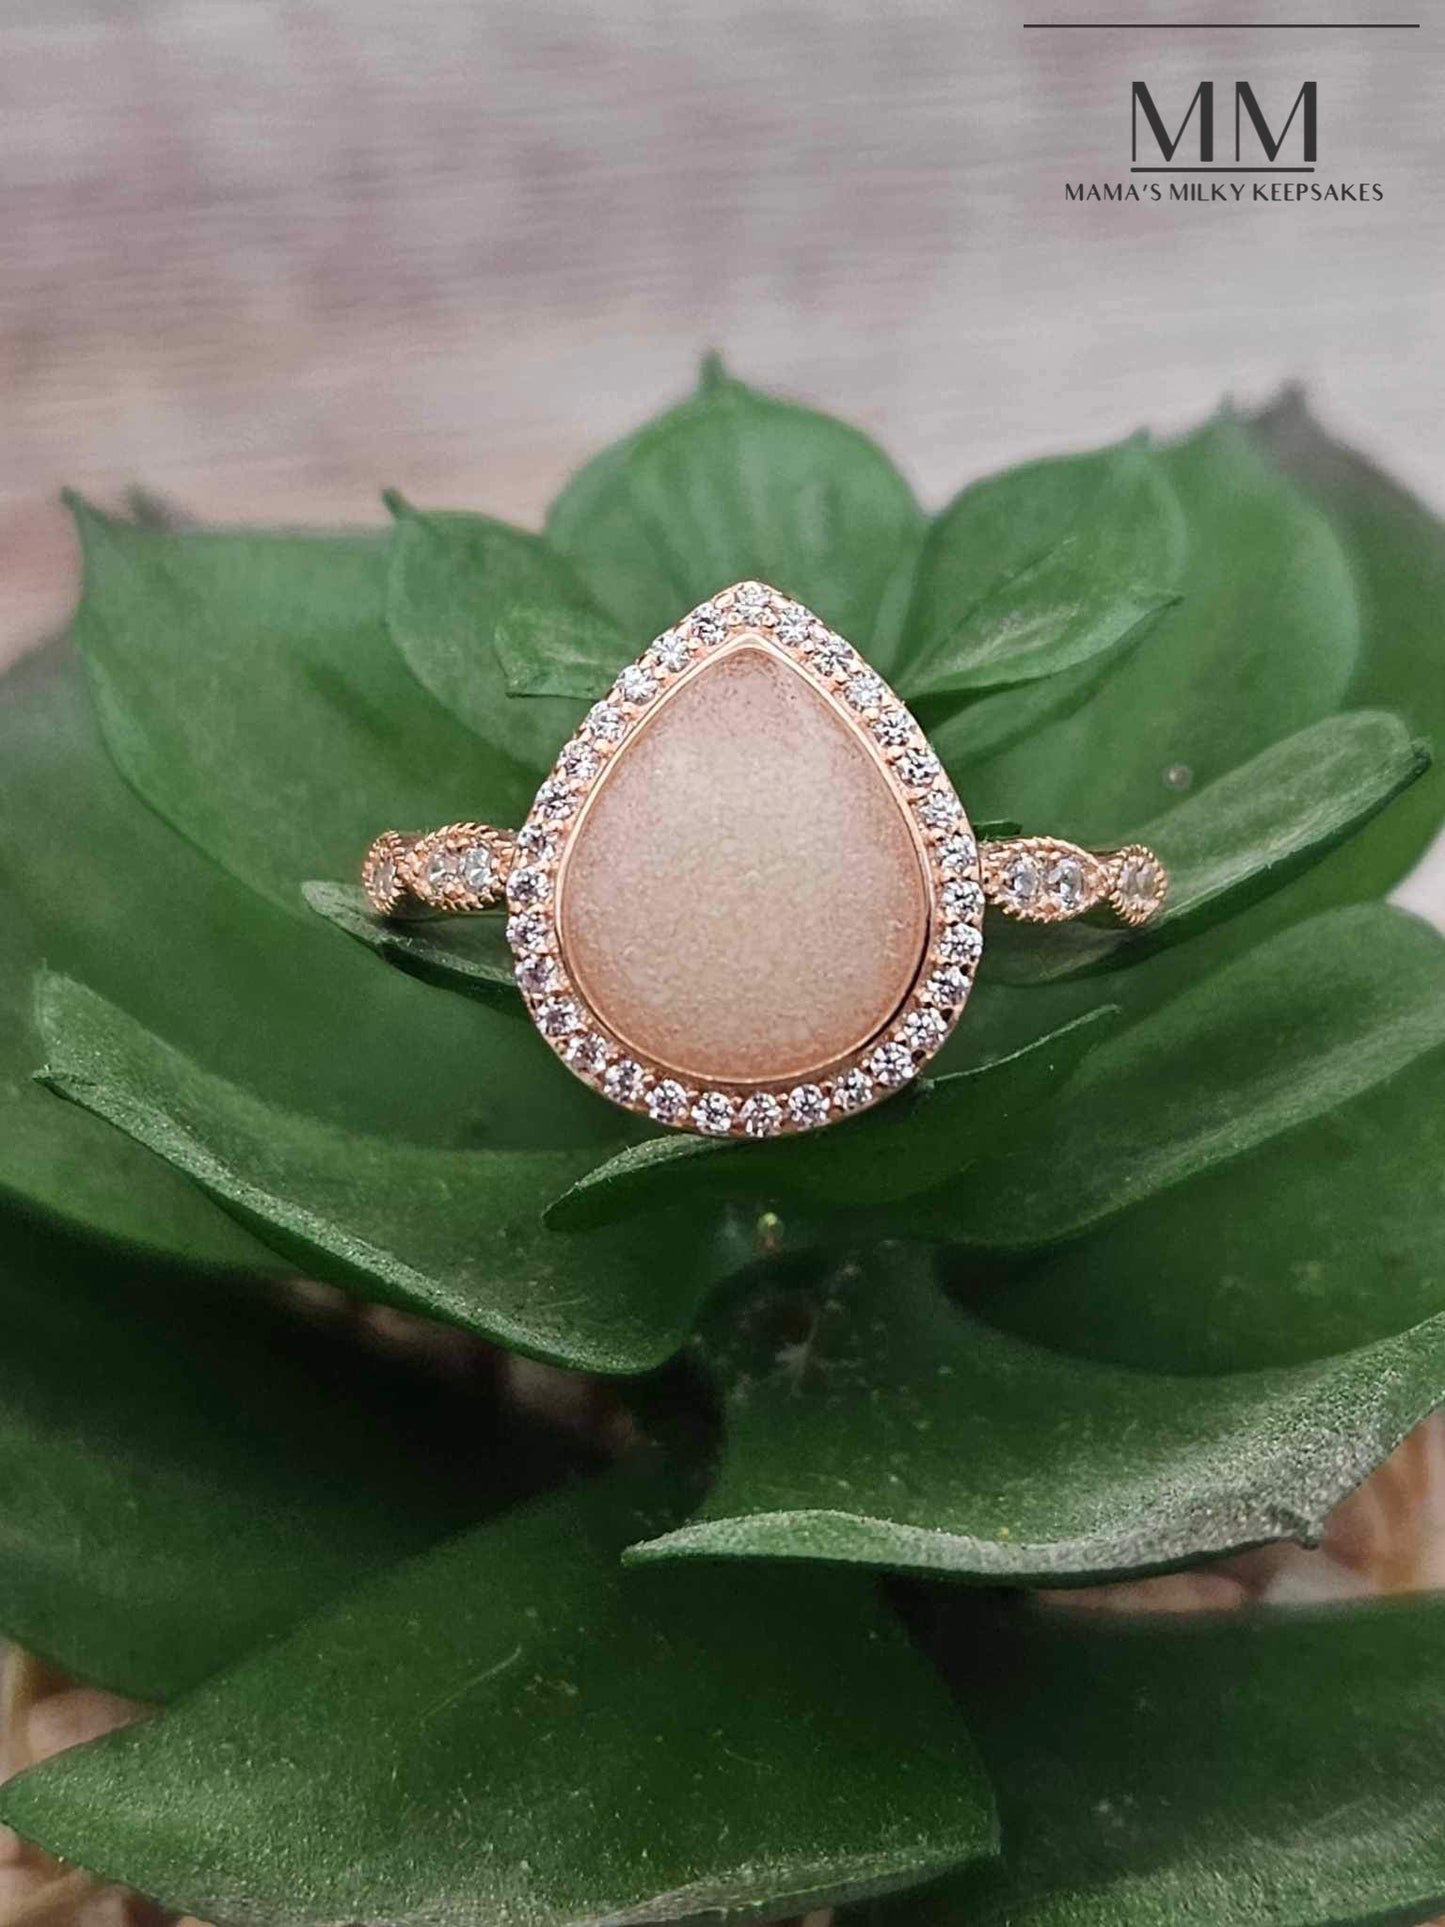 Breastmilk Pear Ring Cremation Pear Ring, Keepsake  Pear ring, Sterling Silver Pear Ring, Hair Pear Ring, Ash Pear Ring, Umbilical Cord Pear Ring, BreastmilkJewelry Pear Ring